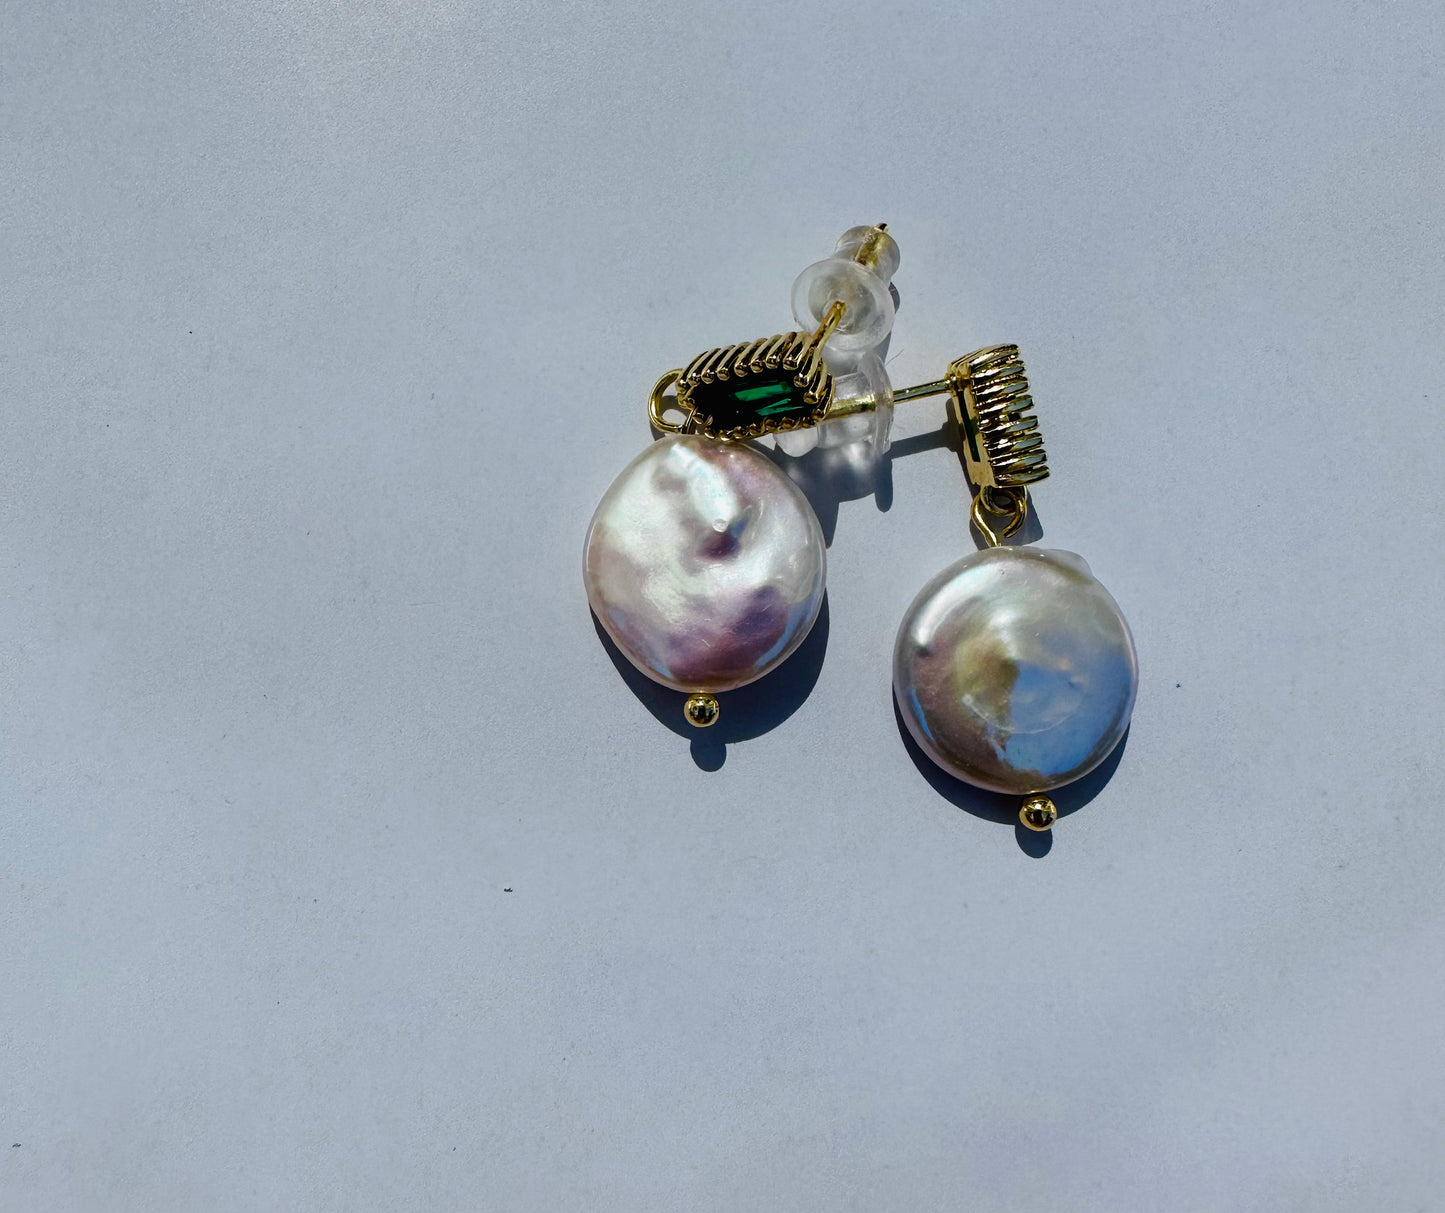 Pearl earring with green stone